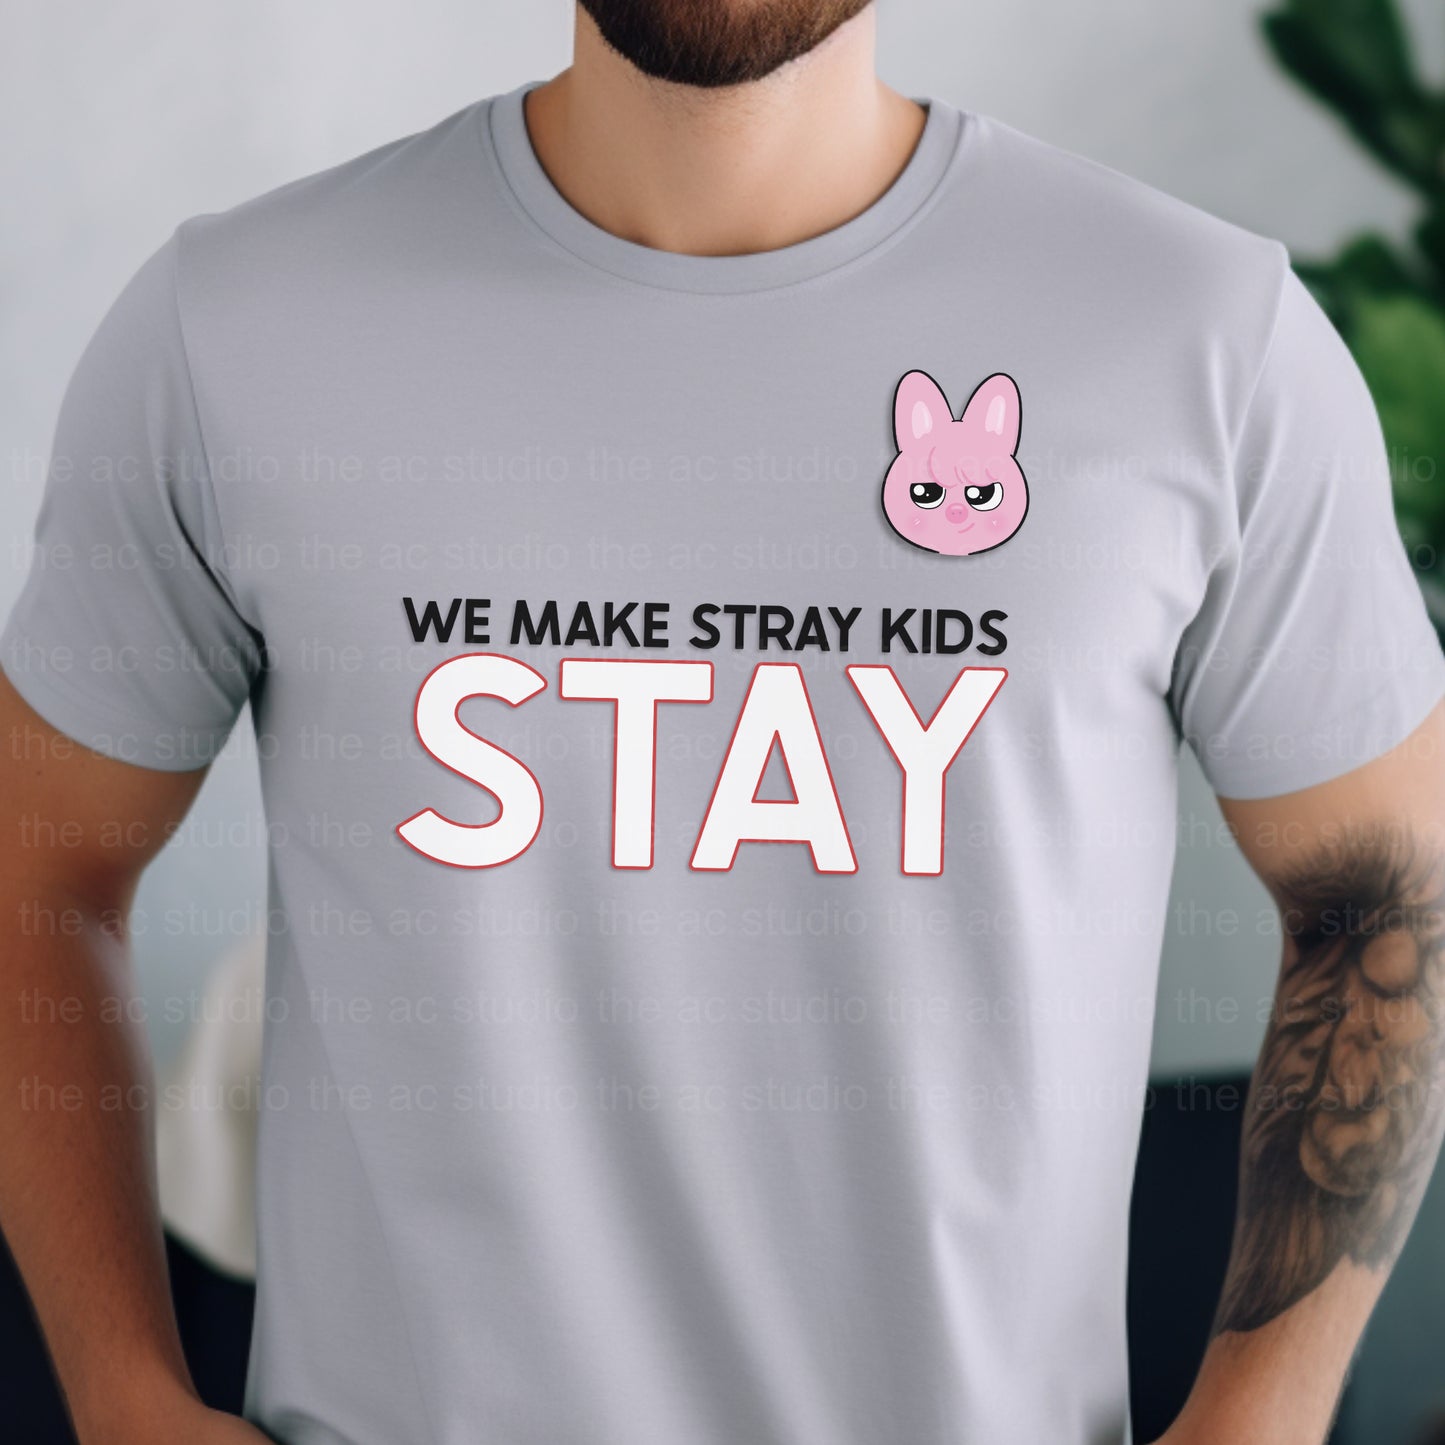 STAY - We Make SK Stay T-Shirt (Gray)